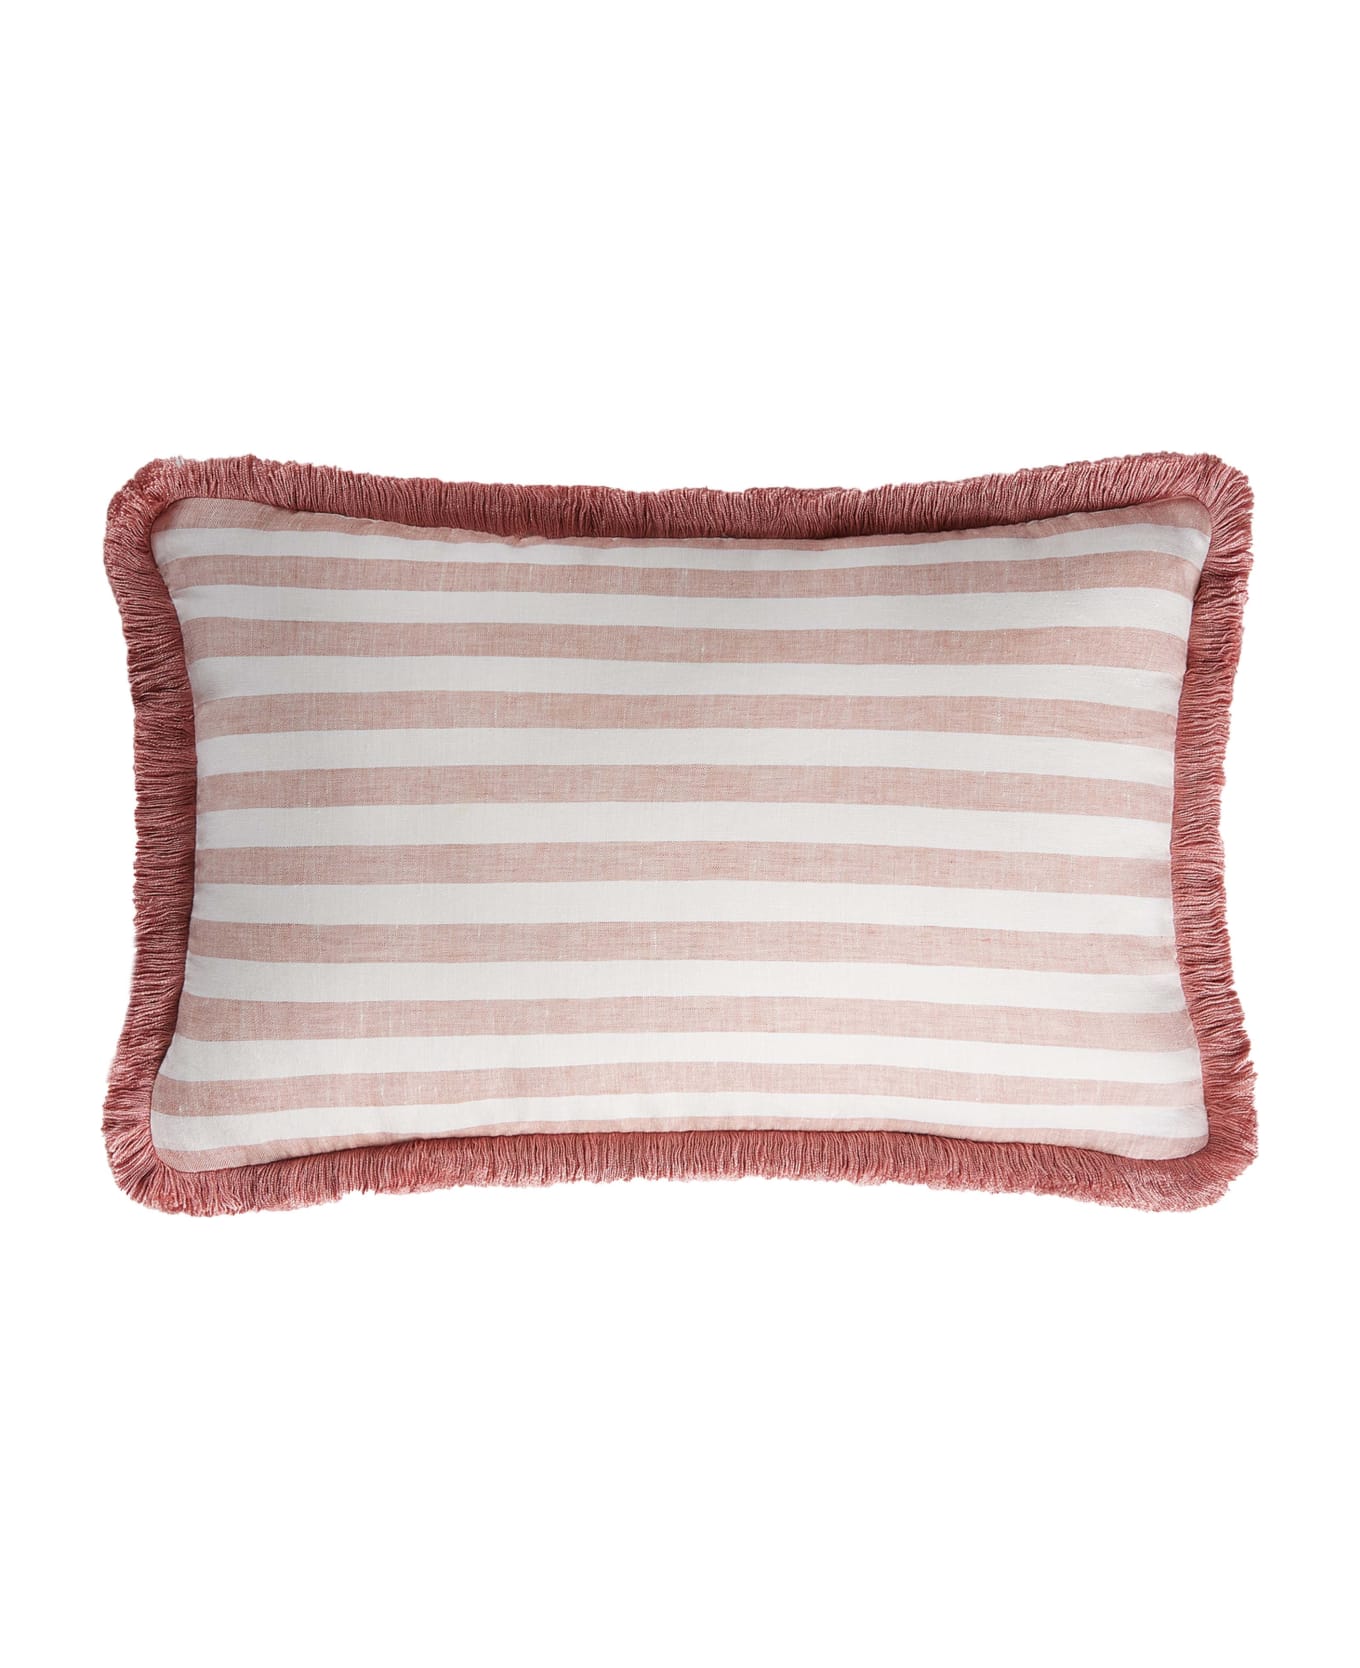 Lo Decor Happy Linen Pillow - Striped White - Light Pink クッション